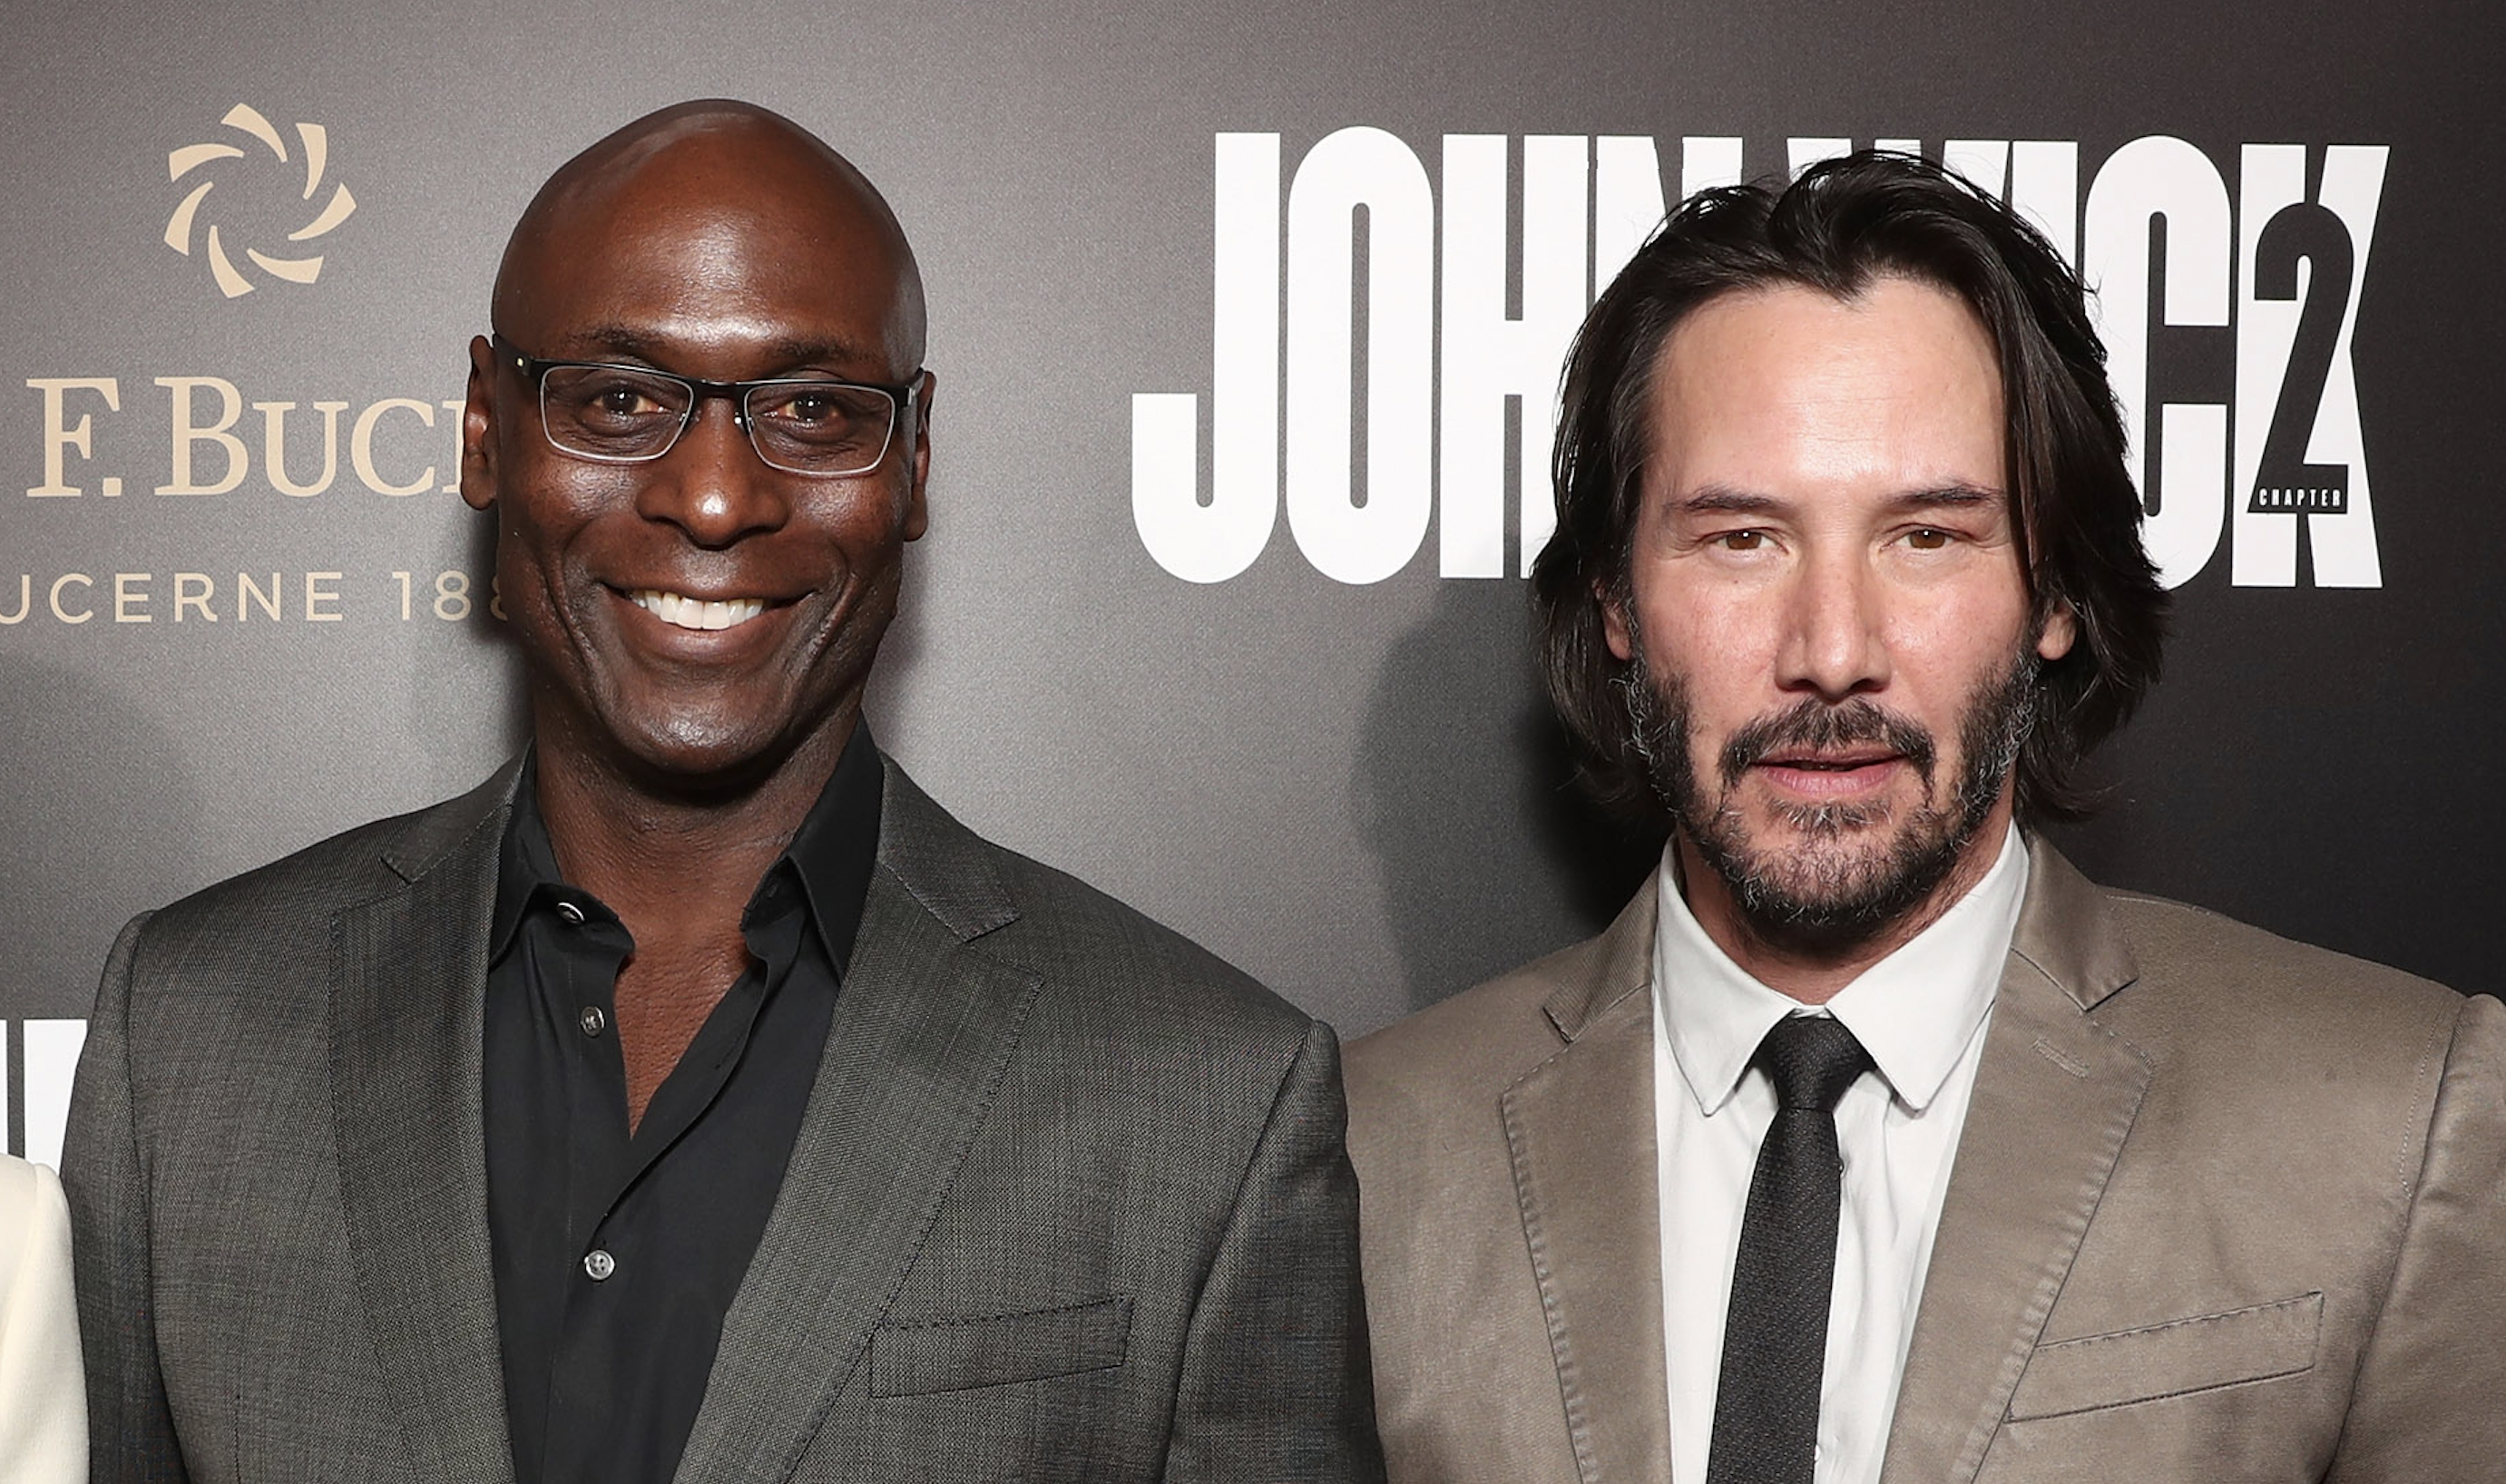 keanu reeves once wrote lance reddick a letter crediting him for making people ‘love john wick,' says late actor made the character ‘okay' for viewers